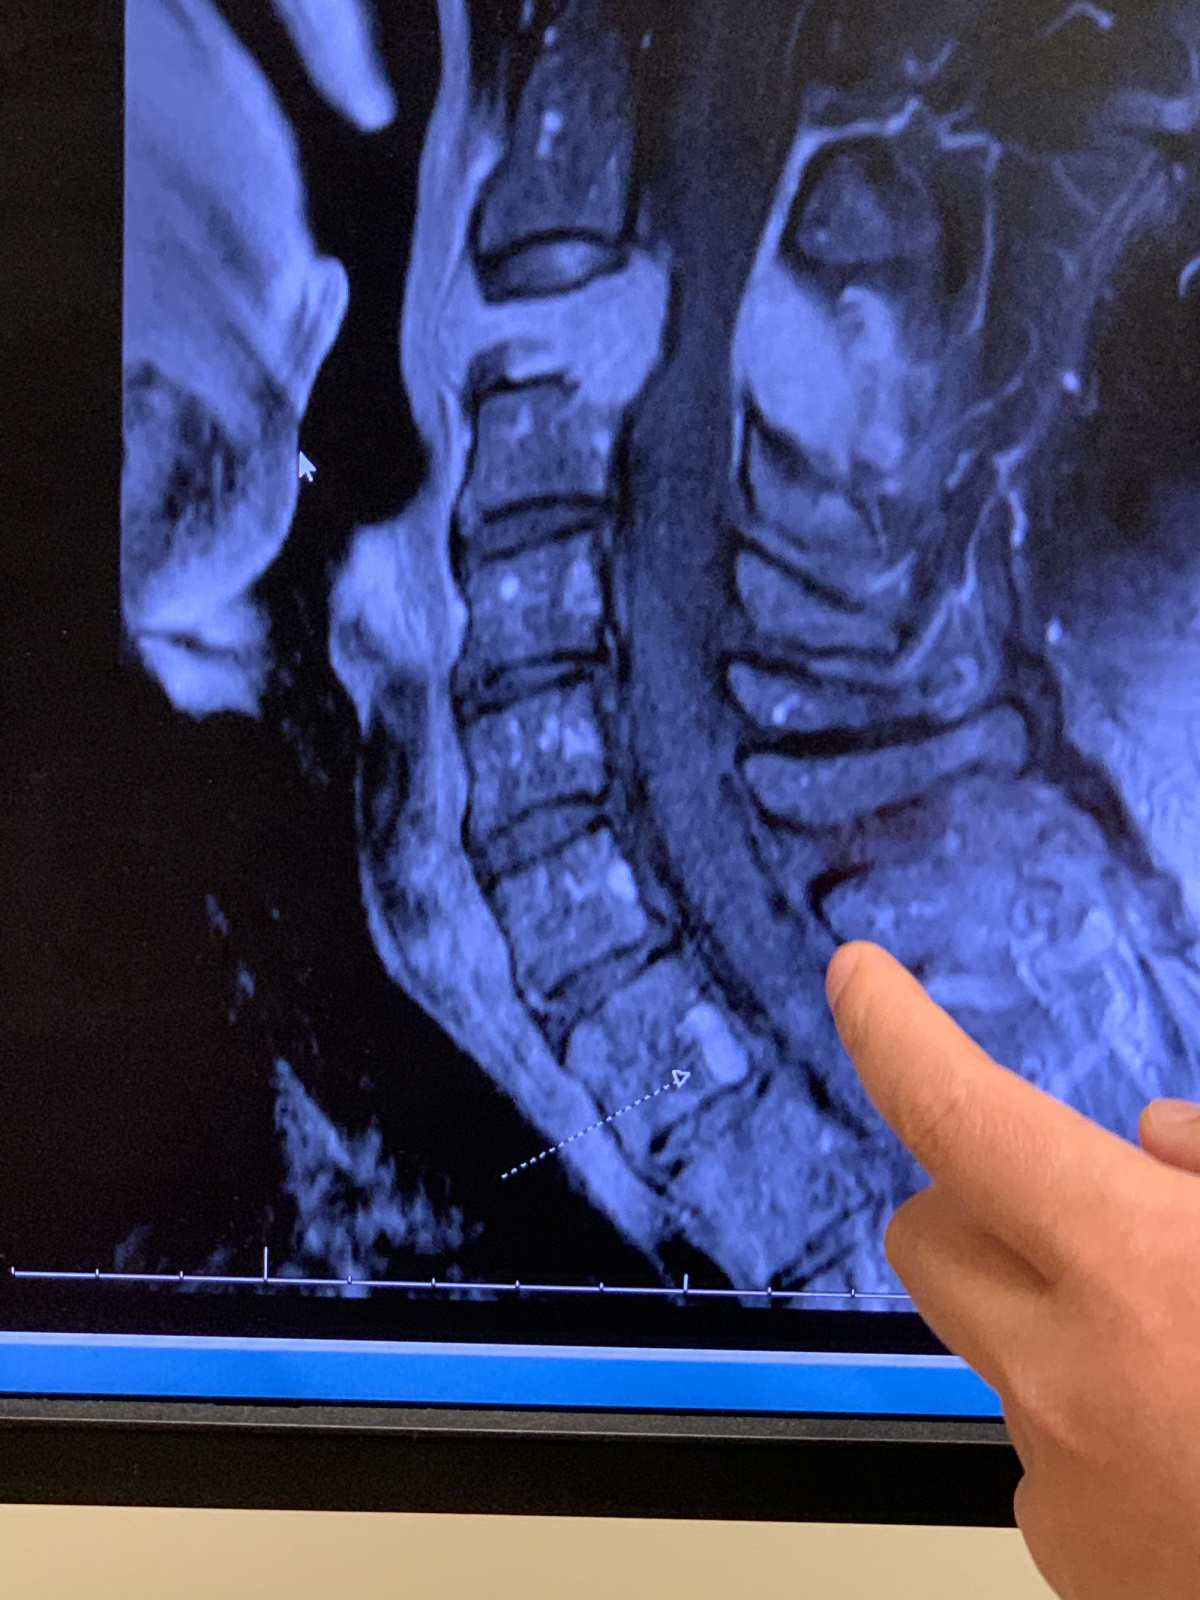 His hematology oncologist showing us the pre-surgery imaging.  You can see the tumor at the top, squeezing the spinal cord. The surgery relieved all that pressure, and the radiation will zap the tiny bits remaining that the surgeon couldn’t safely remove. 